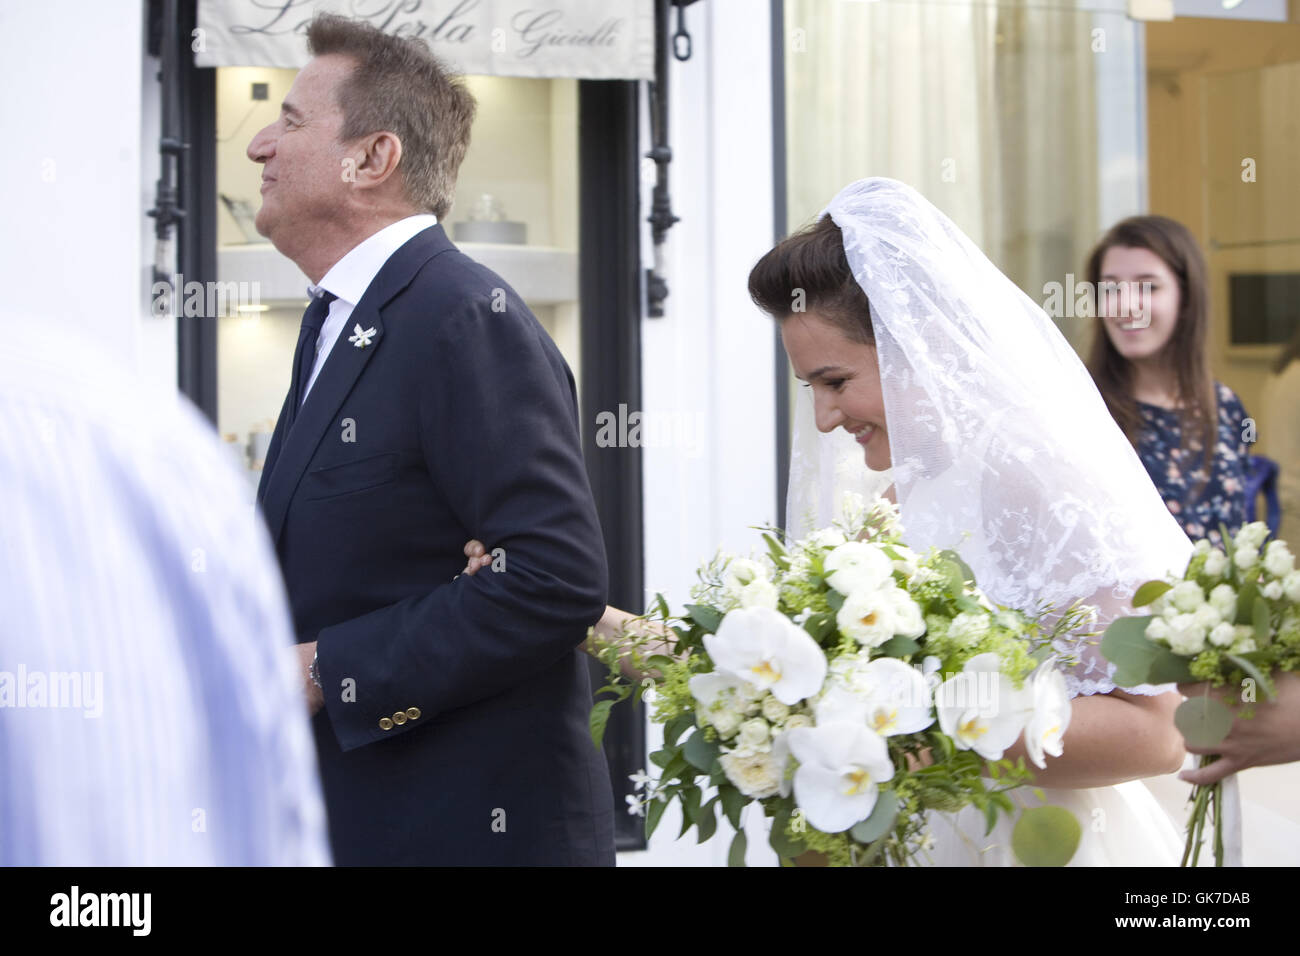 The wedding of Italian actor/director Christian De Sica and Mariu De Sica  Featuring: Christian De Sica, Mariu De Sica Where: Anacapri, Italy When: 04 Jun 2016 Credit: IPA/WENN.com  **Only available for publication in UK, USA, Germany, Austria, Switzerlan Stock Photo